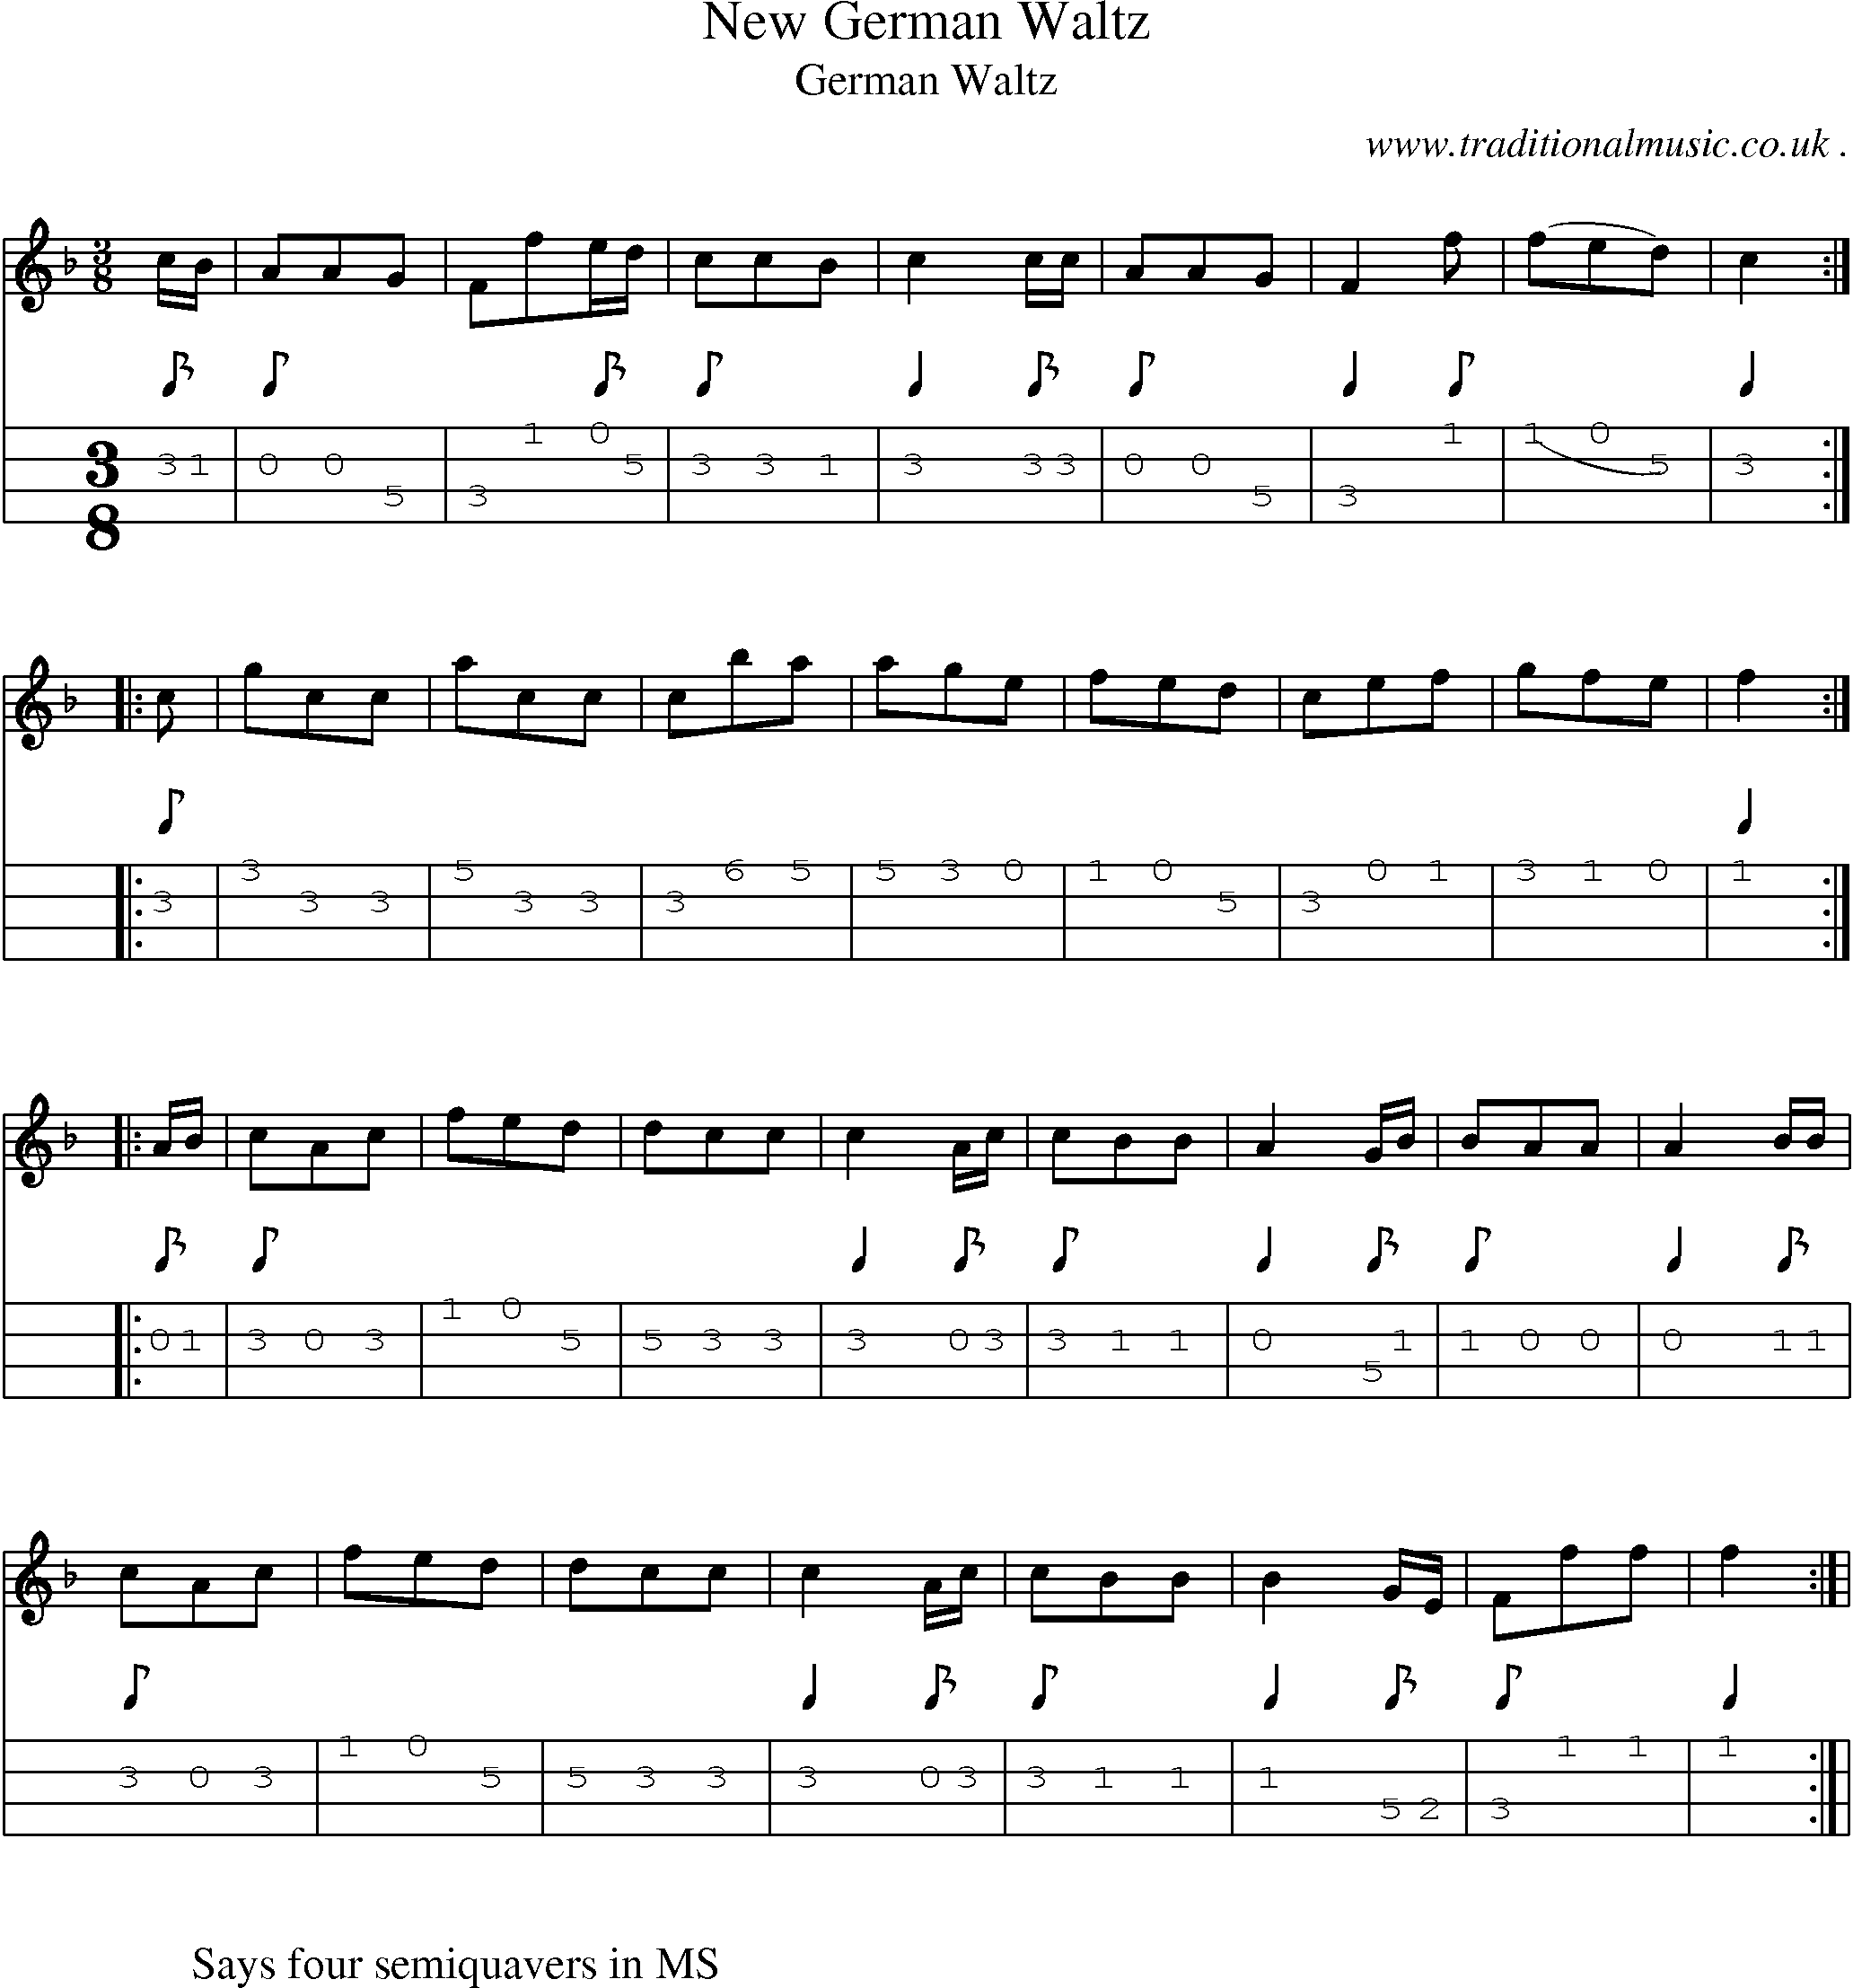 Sheet-Music and Mandolin Tabs for New German Waltz